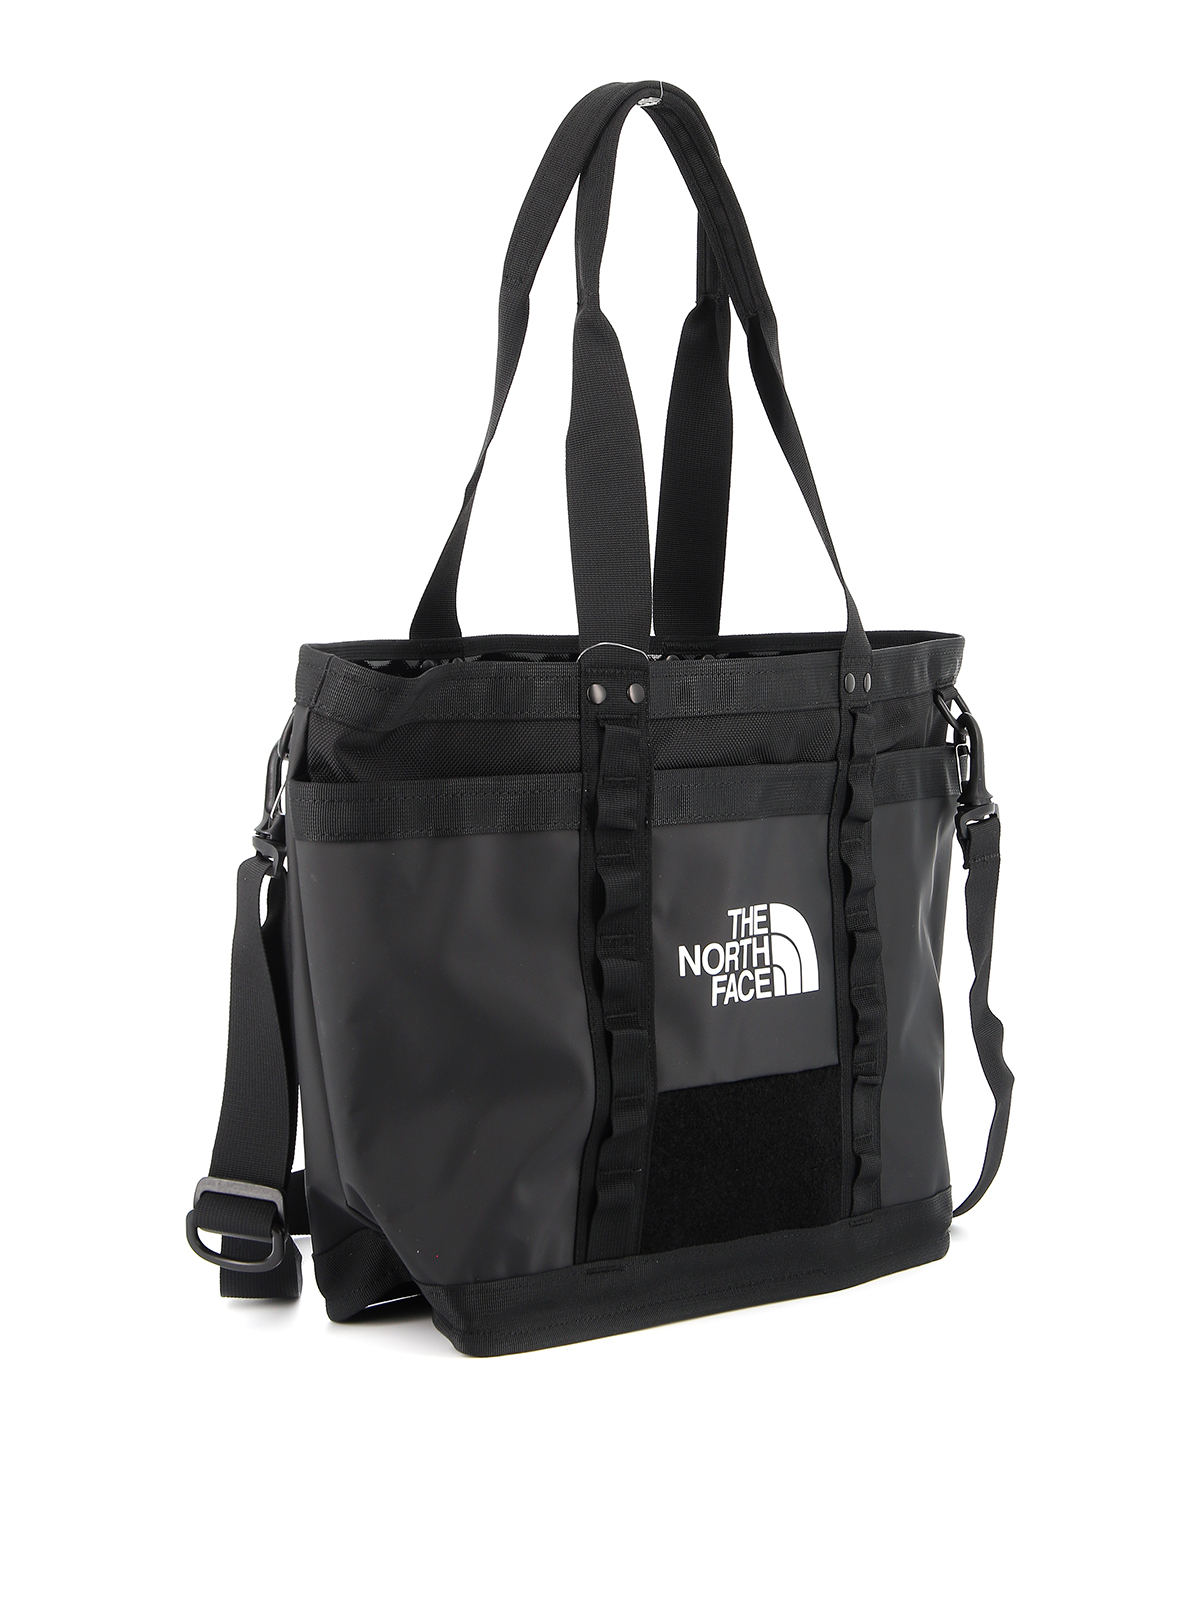 north face utility tote bag